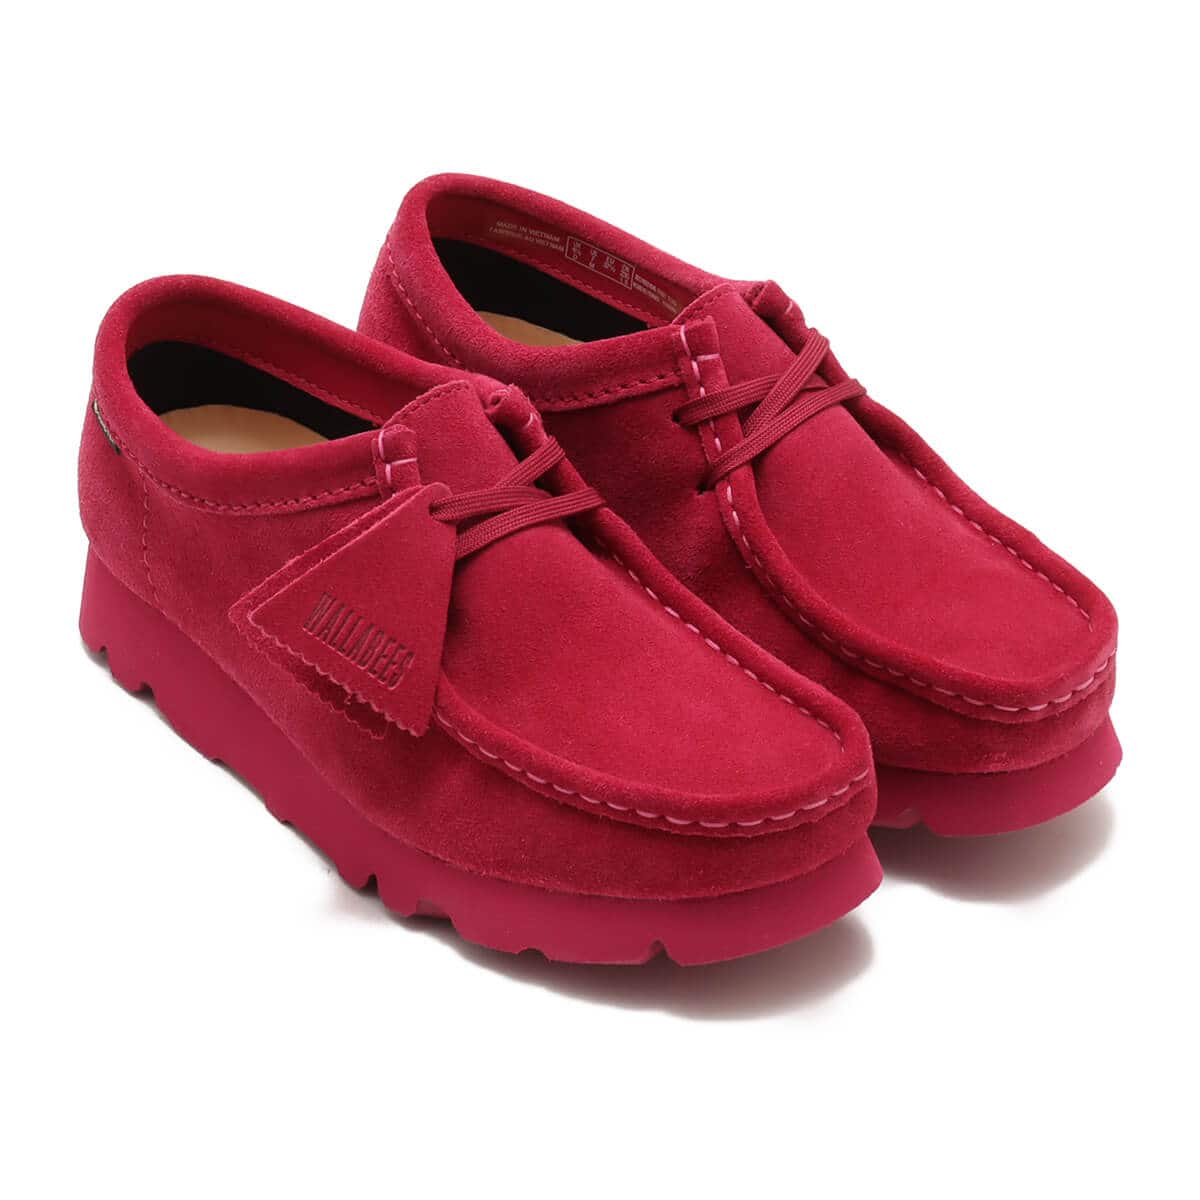 Clarks Wallabee.GTX Berry Suede Berry Suede 23HO-I_photo_large